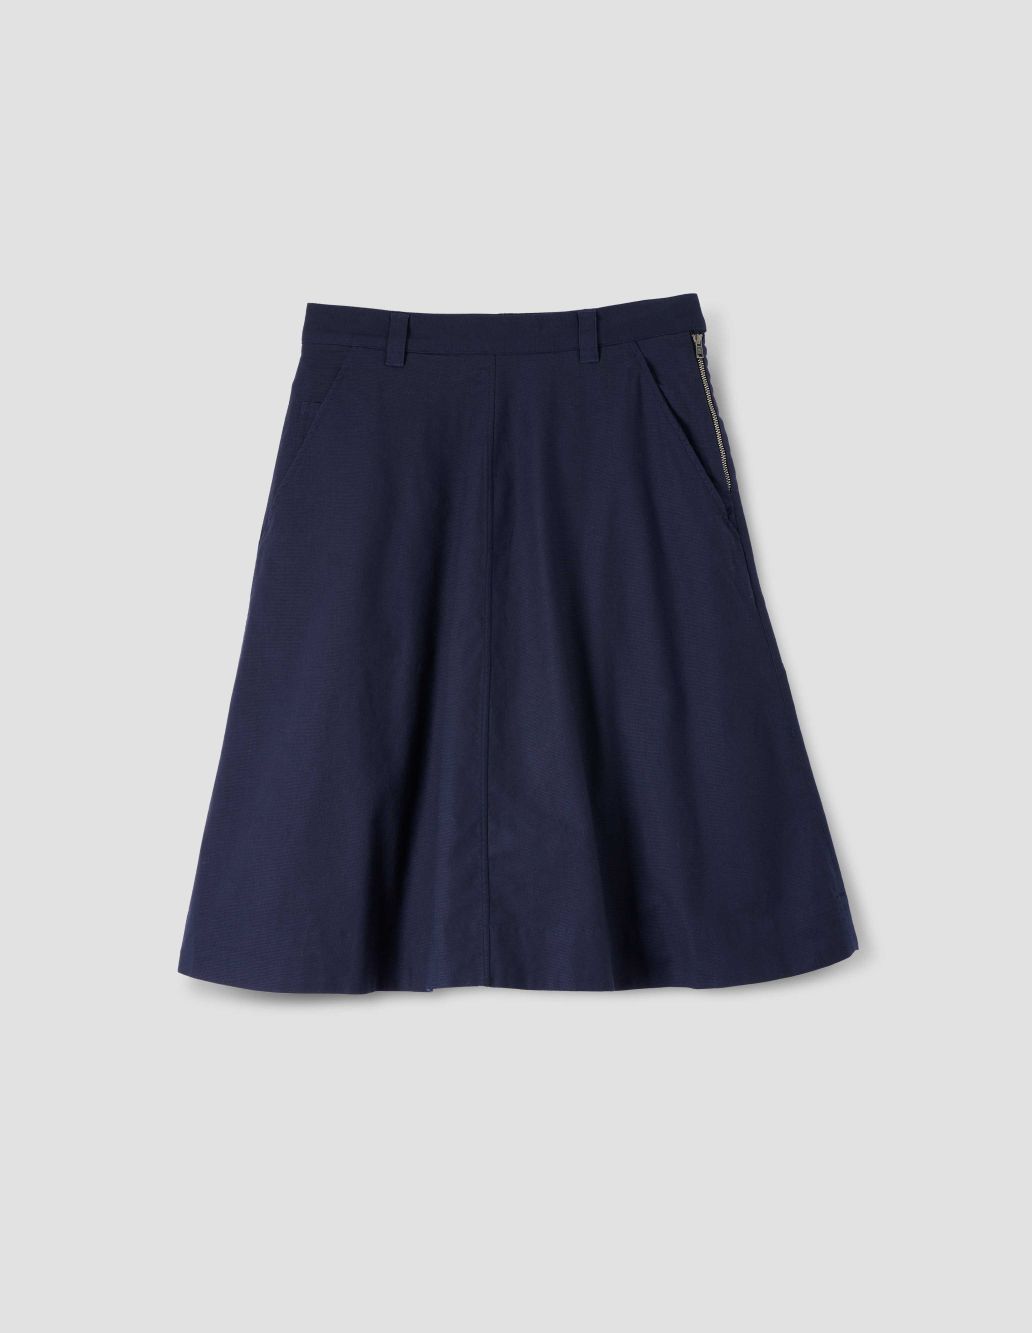 MARGARET HOWELL - Ink textured cotton circle skirt | MHL. by 